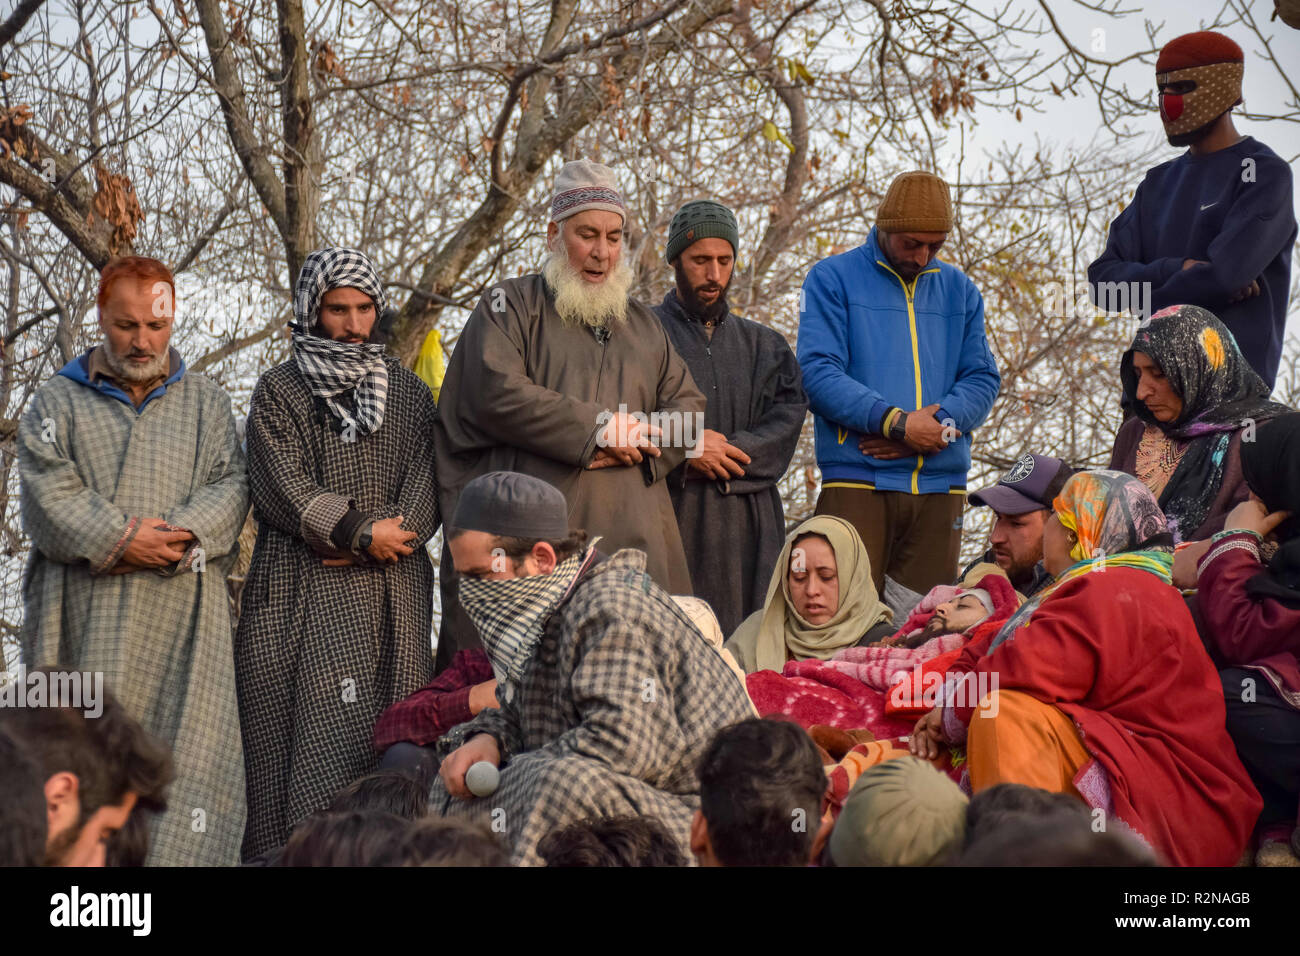 November 20, 2018 - Shopian, Jammu & Kashmir, India - (EDITORS NOTE: Image depicts death.).Kashmiri Muslims are seen offering funeral prayers for the slain militant Abid Nazir Wagay during his funeral procession.Thousands of Kashmiri Muslims attend the funeral procession of the slain Militant Abid Nazir Wagay at his residence Paddarpora in south Kashmir's Shopian district some 80 Kms from summer capital of Srinagar, Abid was killed along with his three associates in a gunfight with Government forces at Nadigam village Shopian and an Indian trooper also killed during the gunfight. (Credit Imag Stock Photo